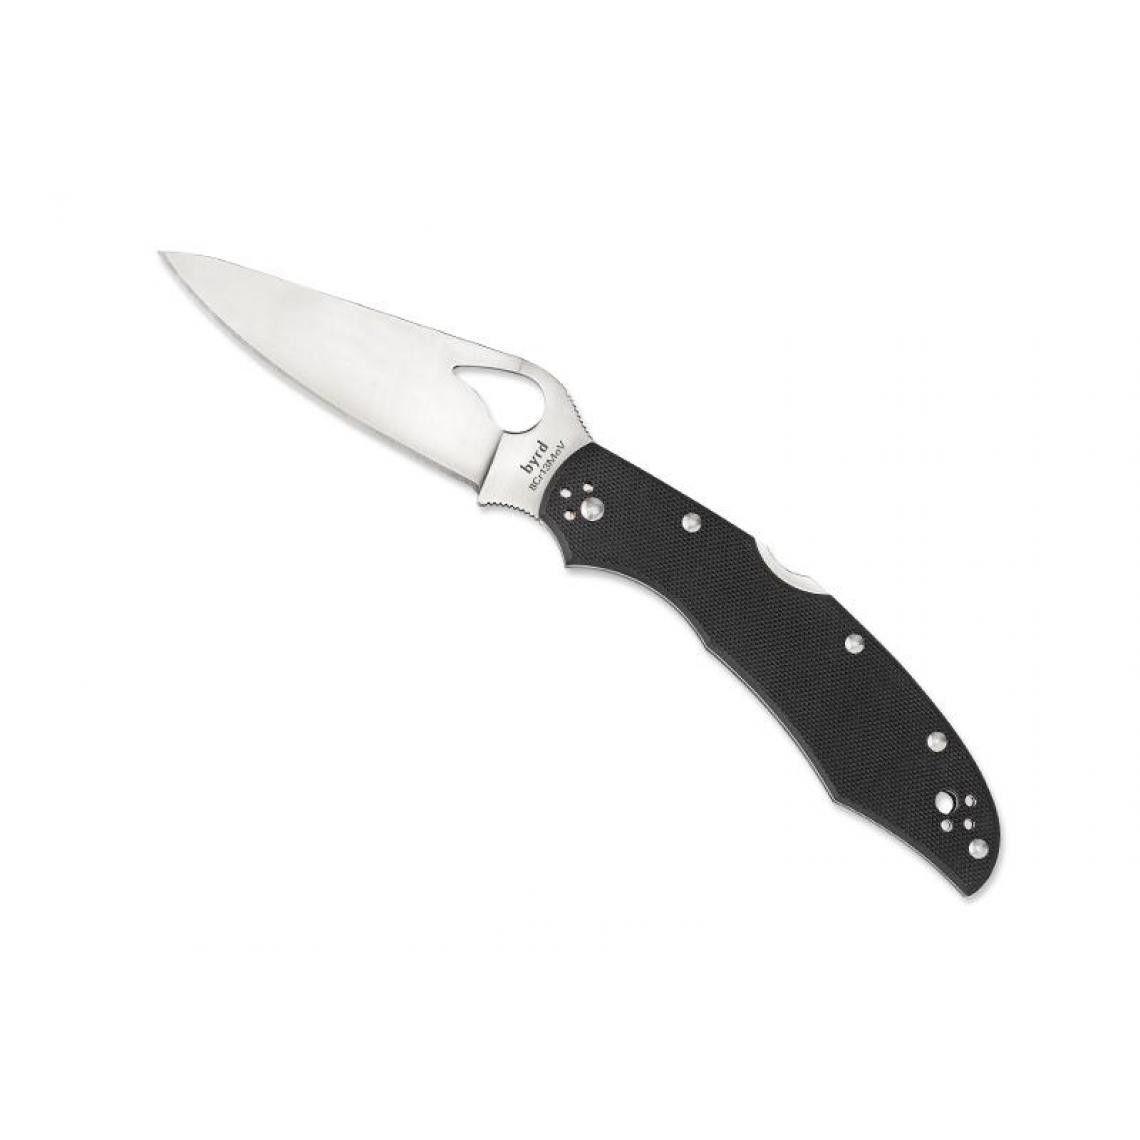 Divers Marques - BYRD KNIFE - BY03GP2 - COUTEAU BYRD CARA CARA 2 G10 NOIR - Outils de coupe